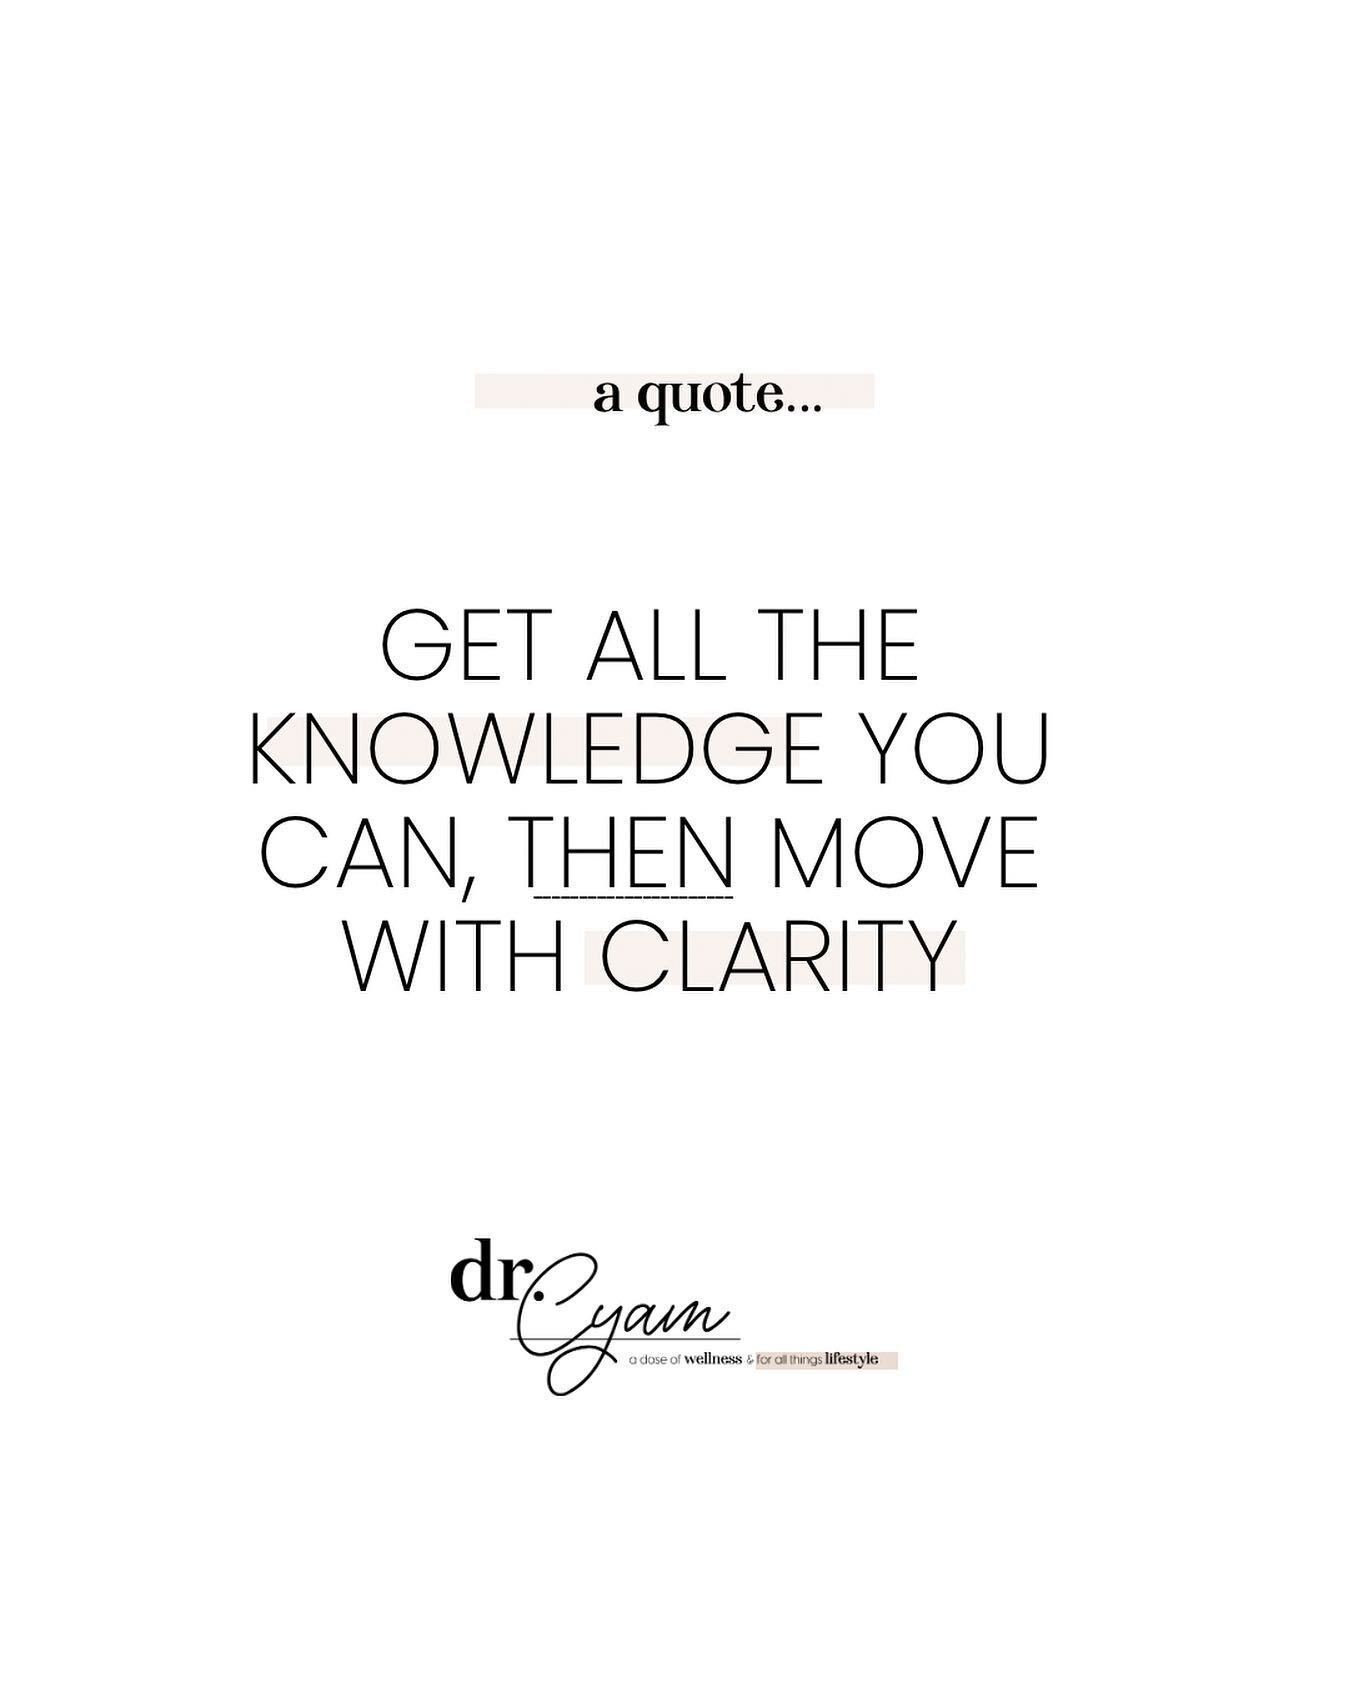 Have you ever pondered on something, got advice from multiple sources and then felt a sense of relief with your final decision? That&rsquo;s clarity. Clarity is something to look for in your decisions as a relates to MANY choices, including ANY vacci